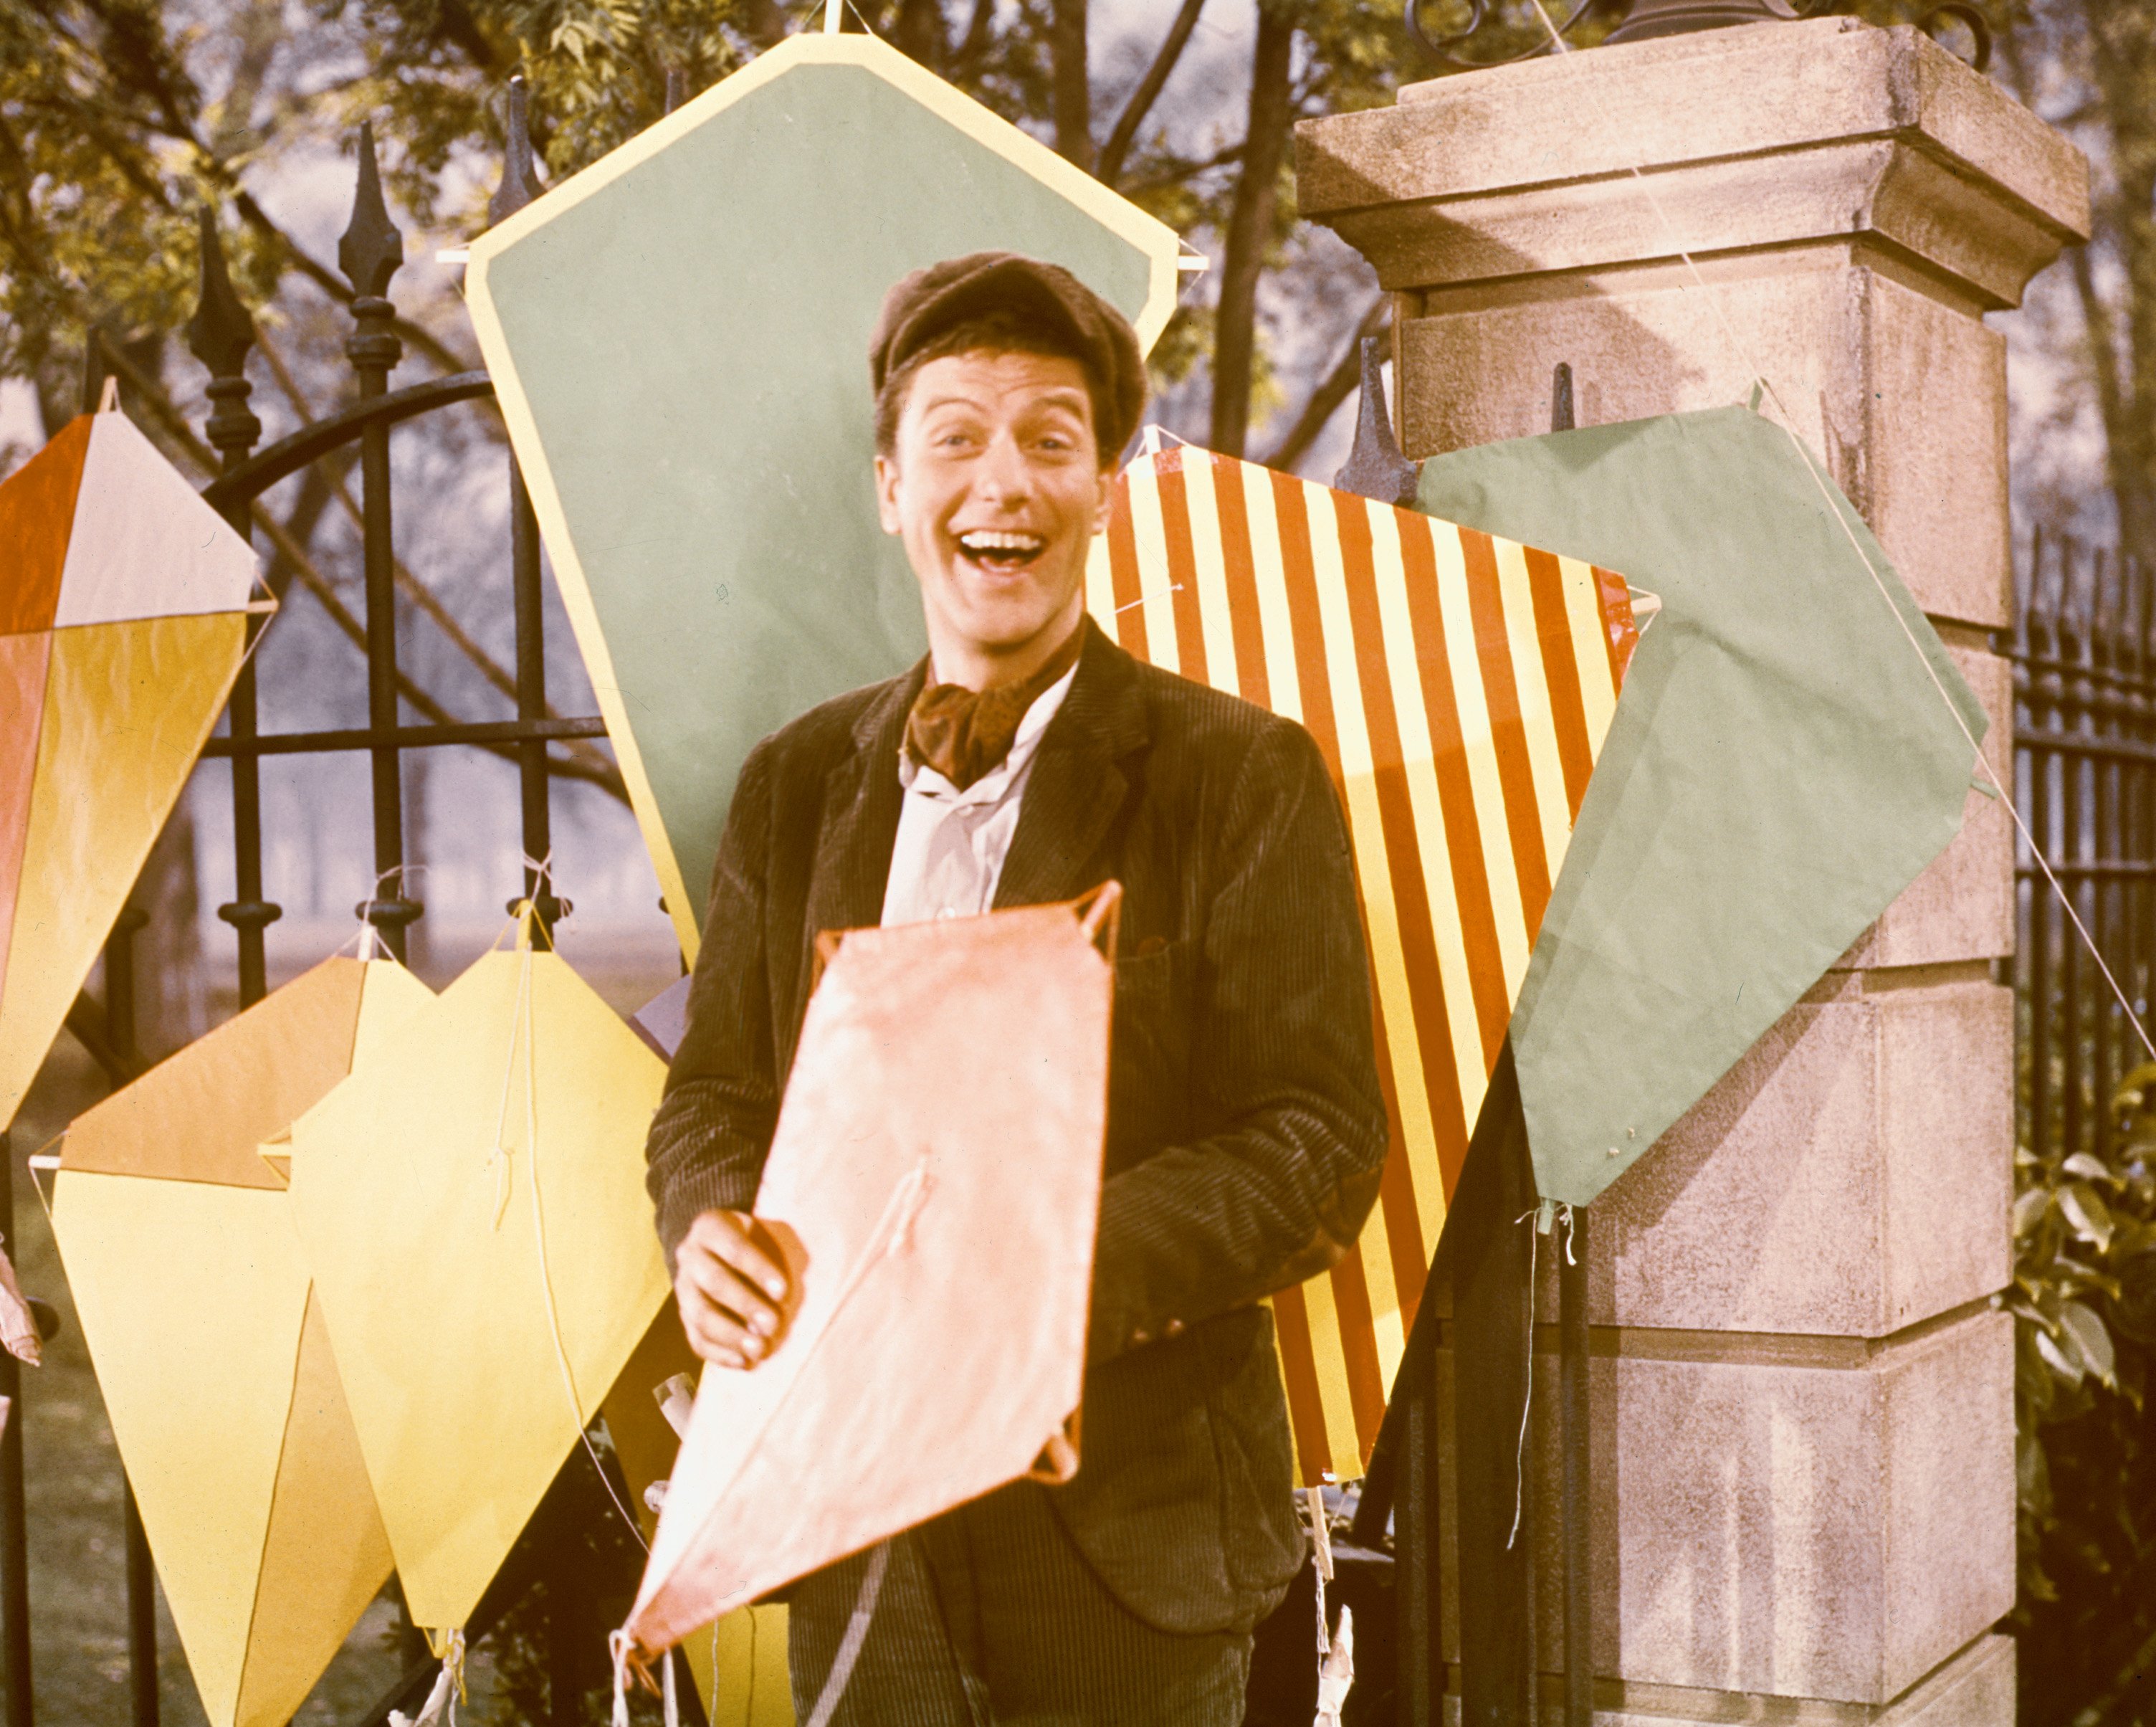 Dick Van Dyke, poses as Bert with a variety of kites in a publicity still for the film, "Mary Poppins", USA, 1964. | Source: Getty Images